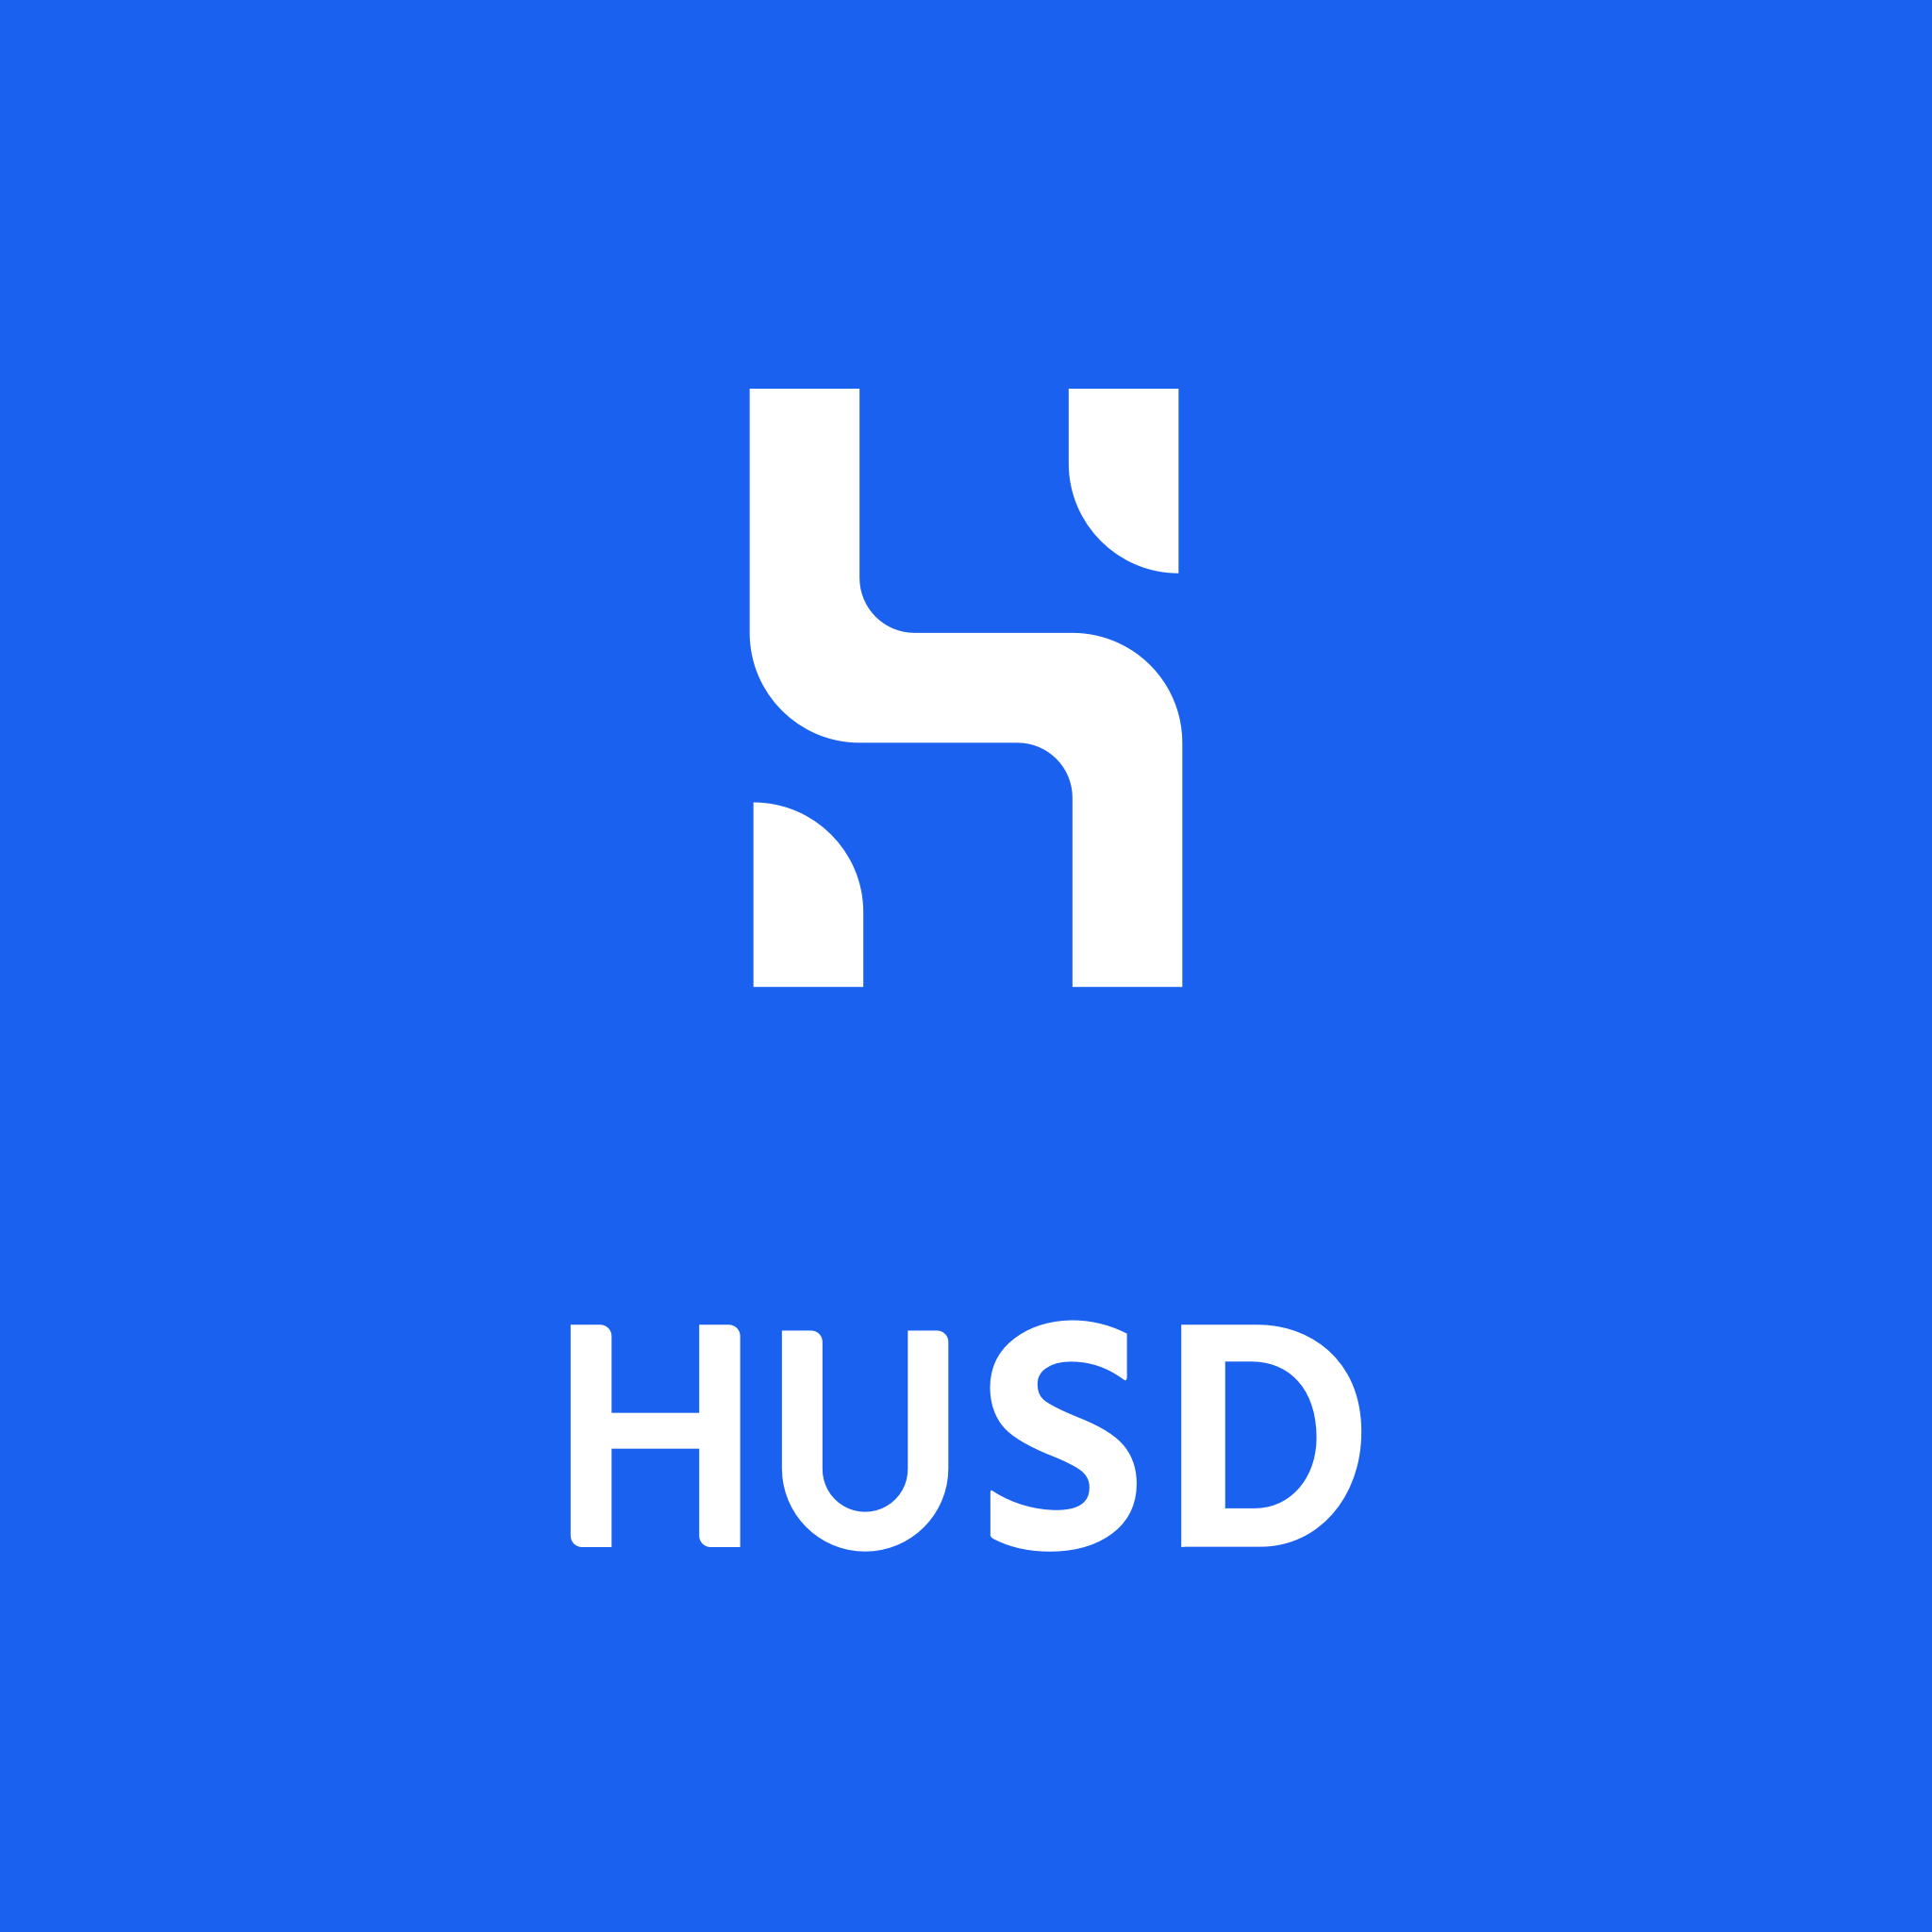 At One Year Old, HUSD Issuance Passes $1.6 Billion